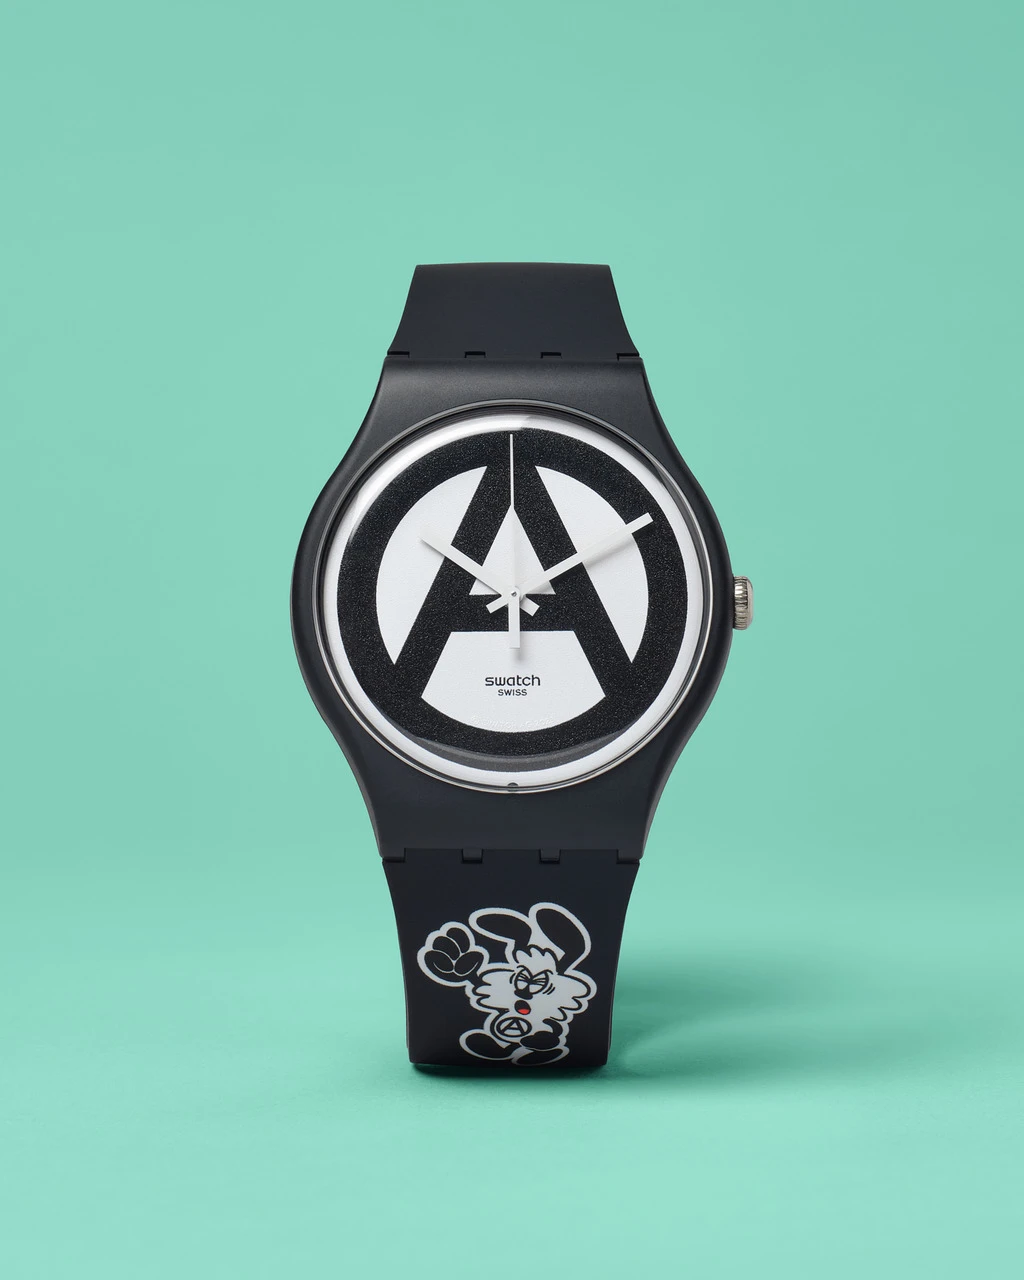 A swatch watch with a black band and a circular face featuring a peace sign design, set against a soft green background. the watch also has a cartoon mouse image near the band's bottom.